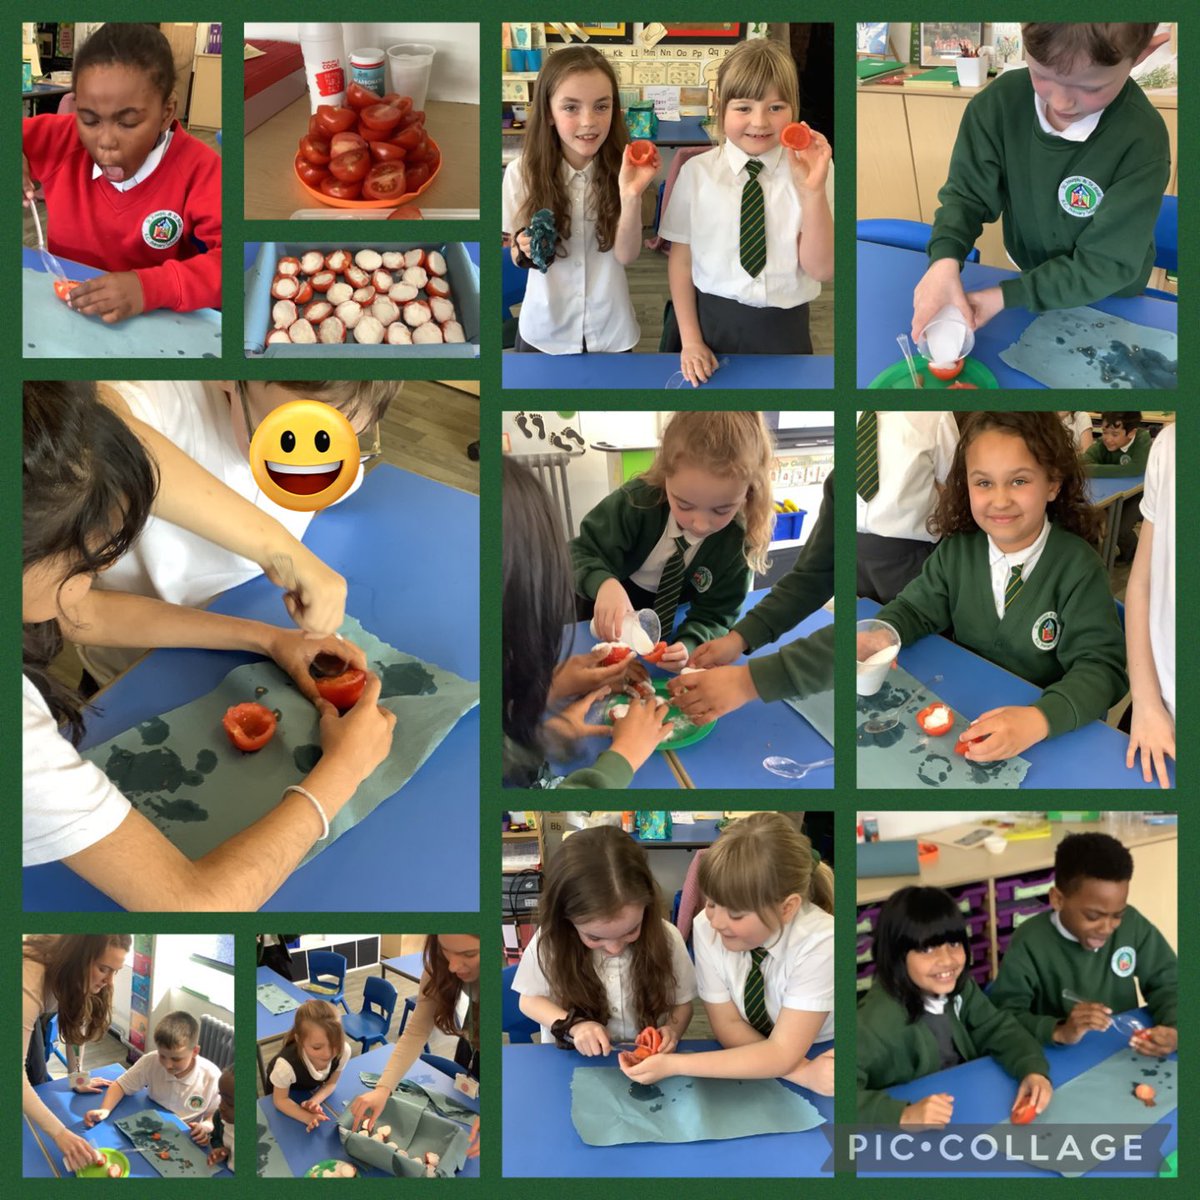 Today we have been learning about the ancient Egyptian mummification process. We applied part of this process by mummifying tomatoes 🍅 We scooped out their ‘organs’, dried their insides and filled them with natron (salt) in order to completely dry them out! #sjsbhistory